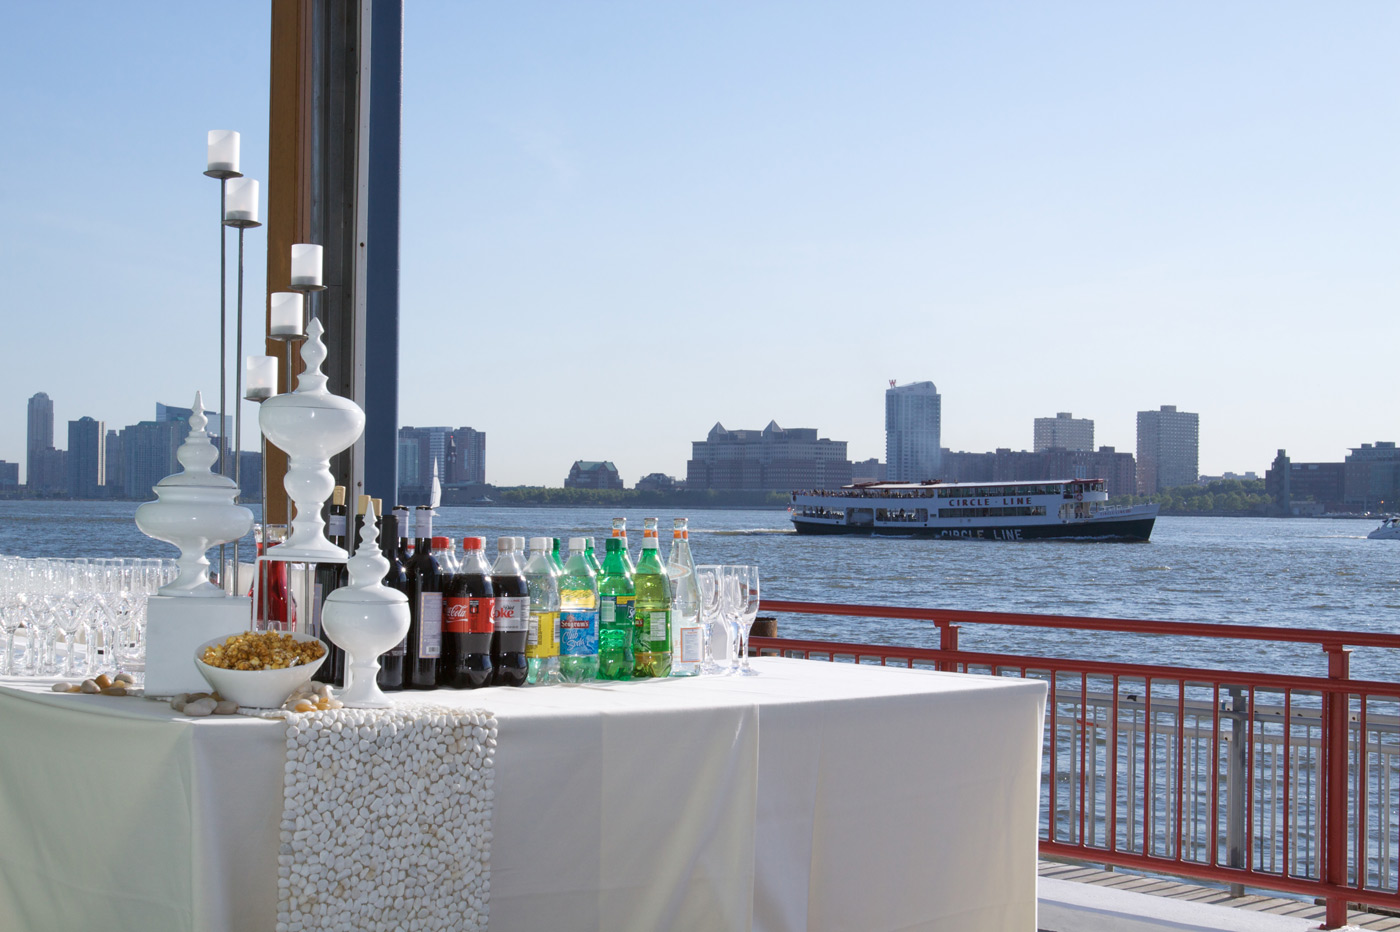 Bar set up by the hudson river